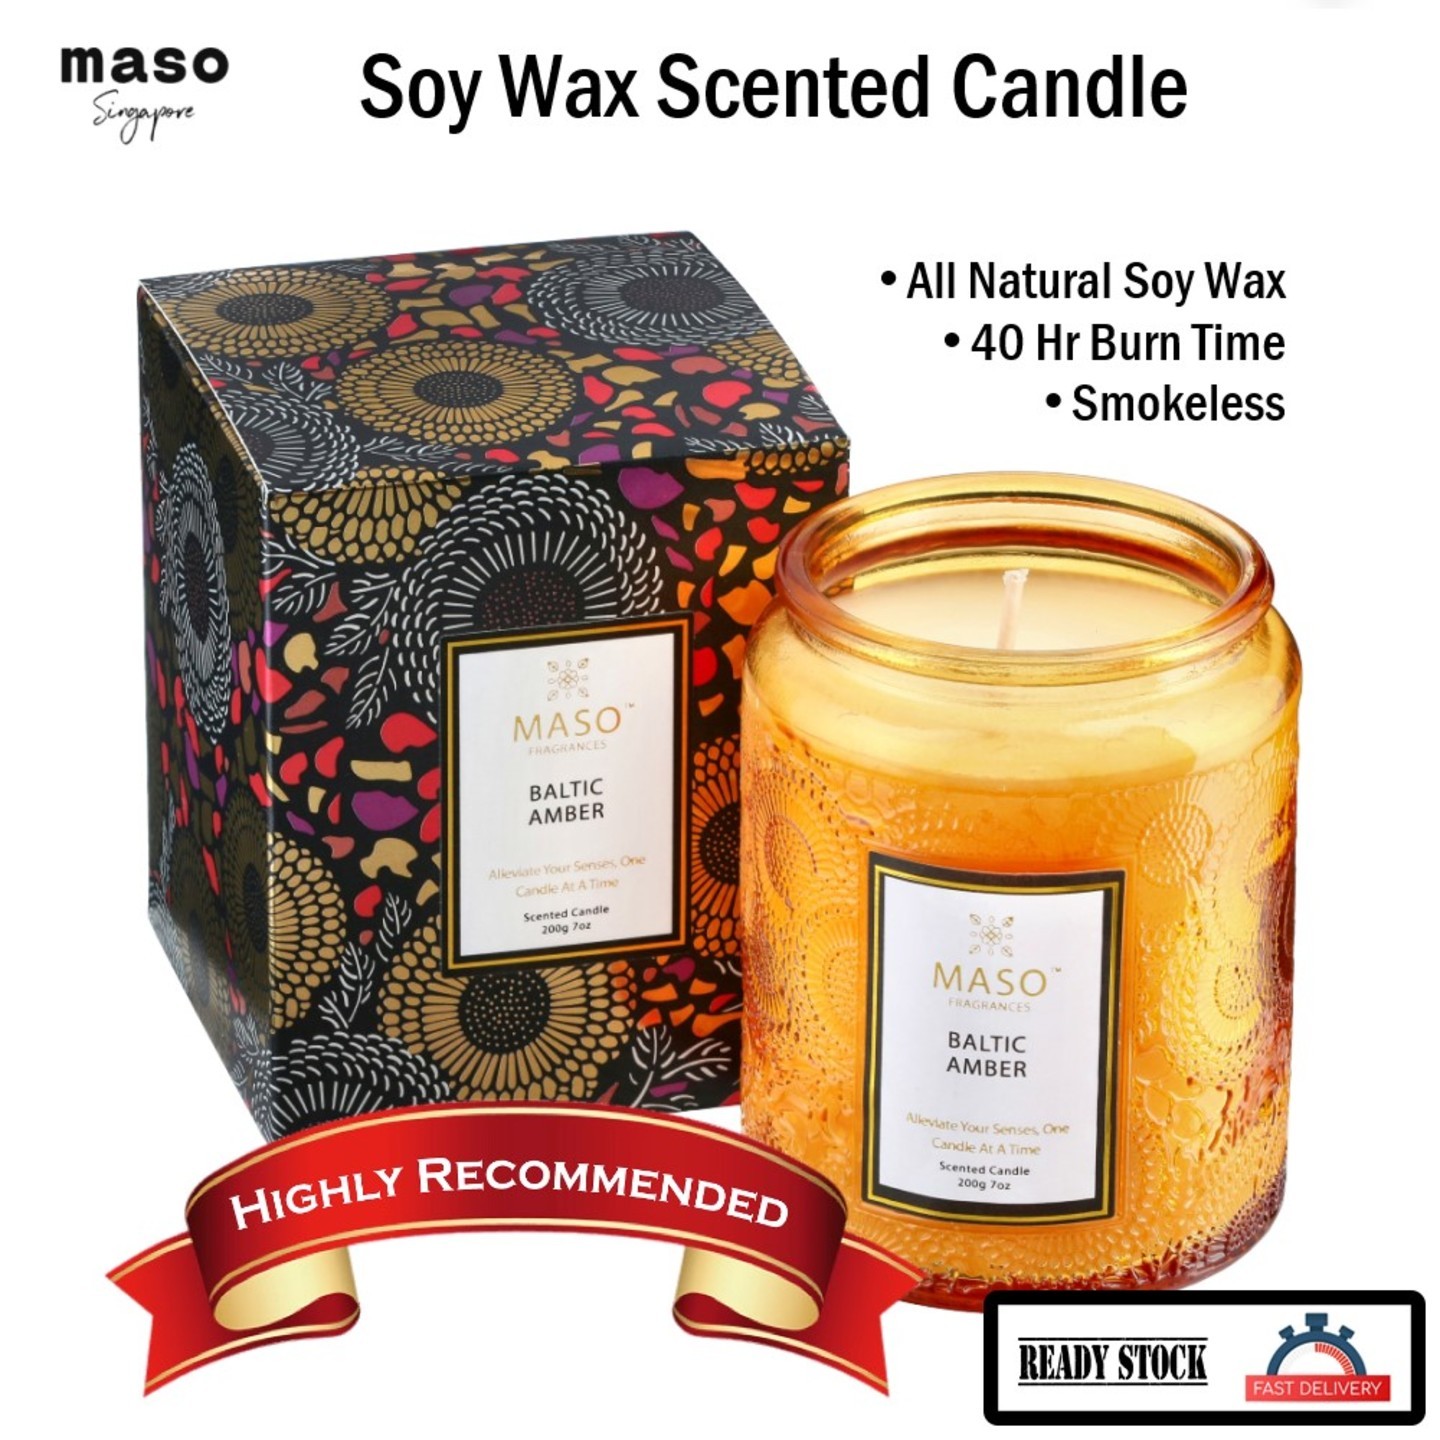 MASO Soy Wax Scented Candle 200g